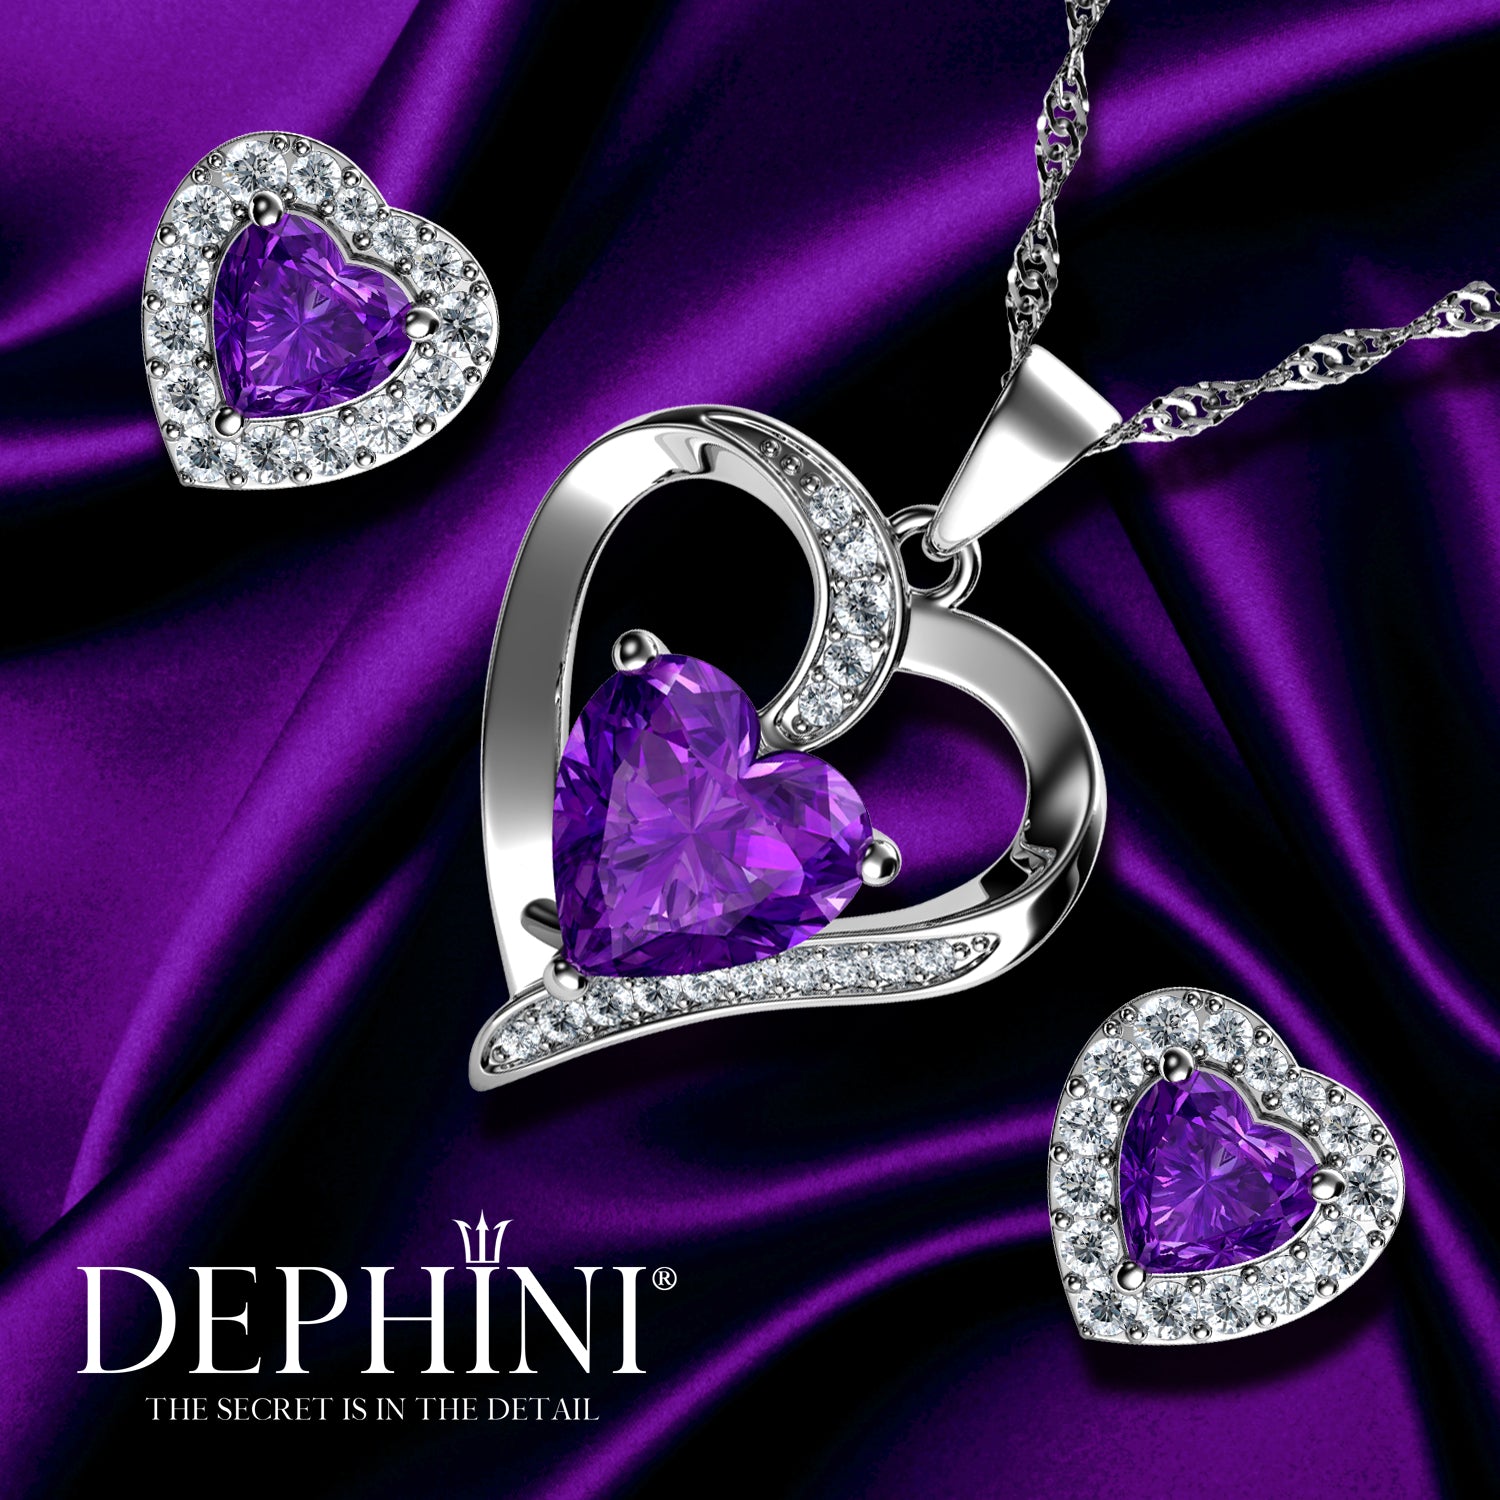 Buy Bridal Necklace Earring Set Purple at Amazon.in